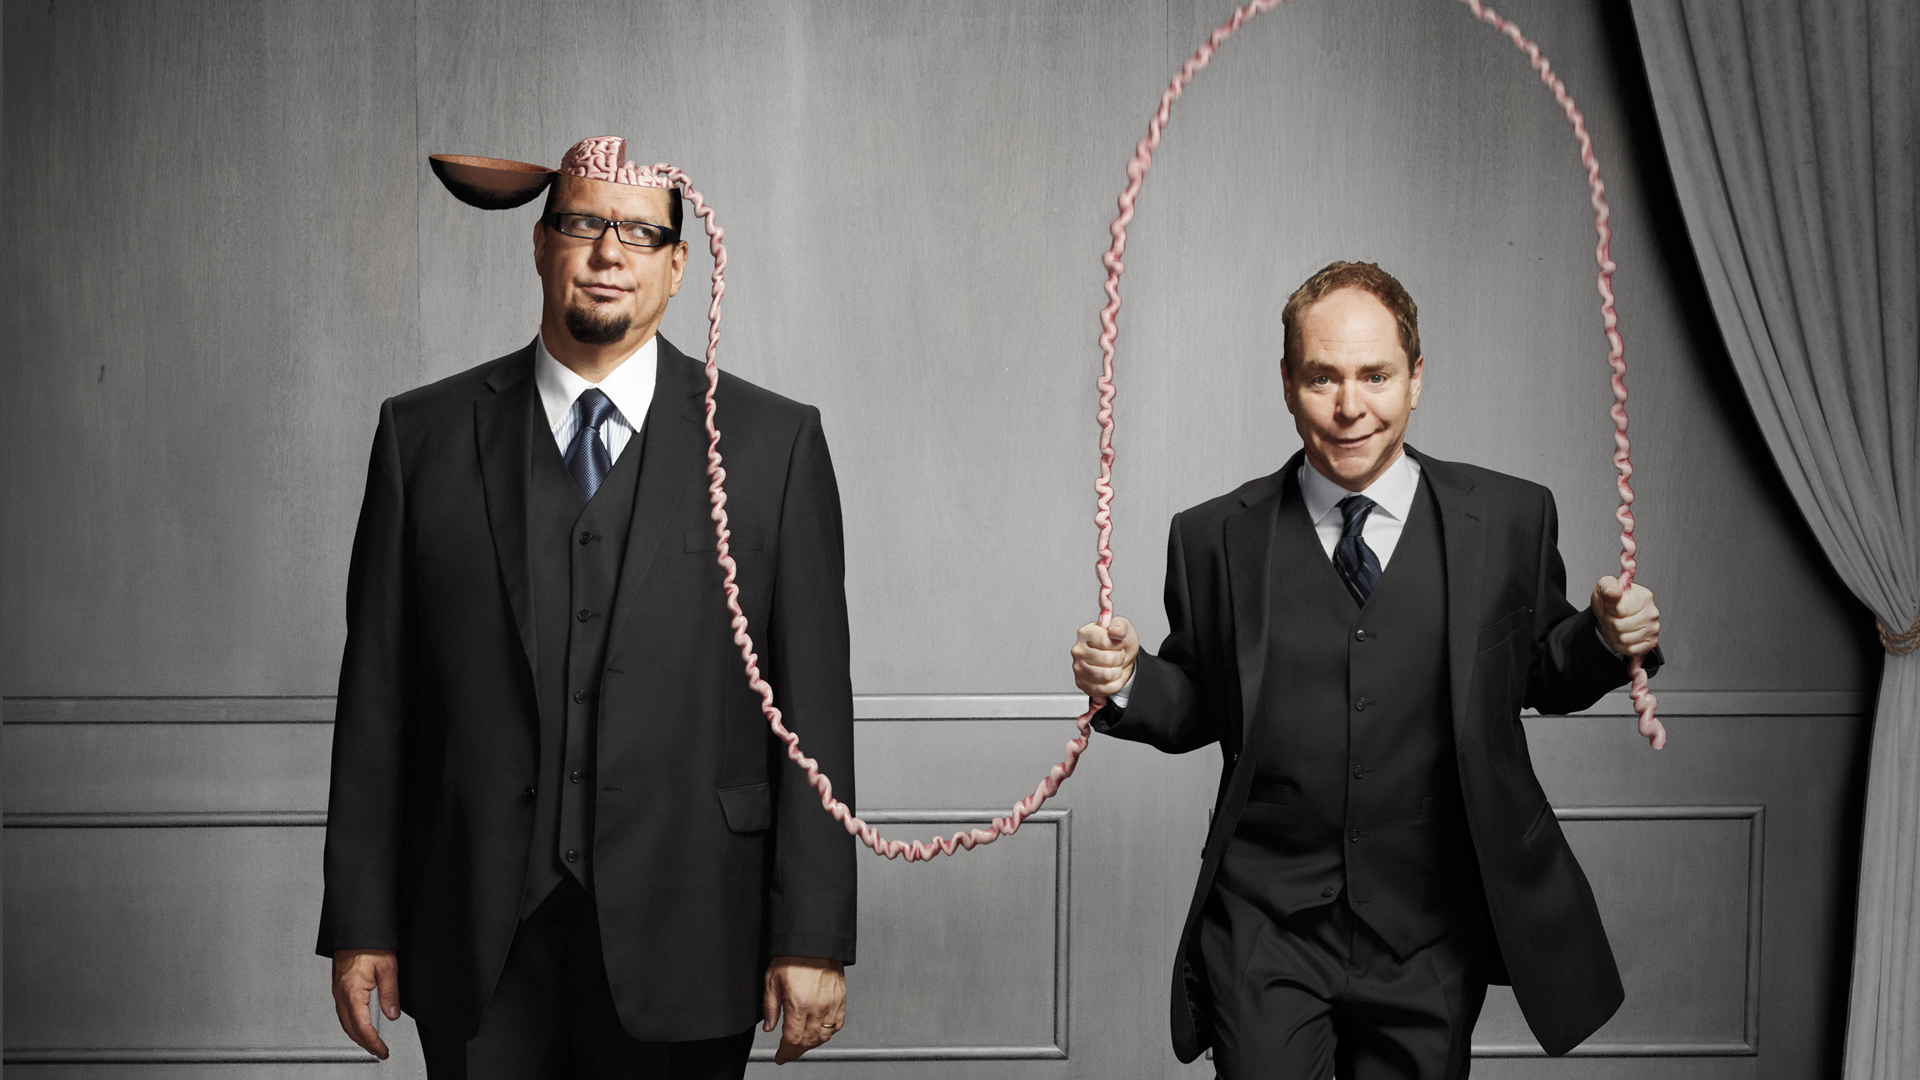 Penn and Teller Shows in Las Vegas. Reviews, Discount, Tickets (2017)